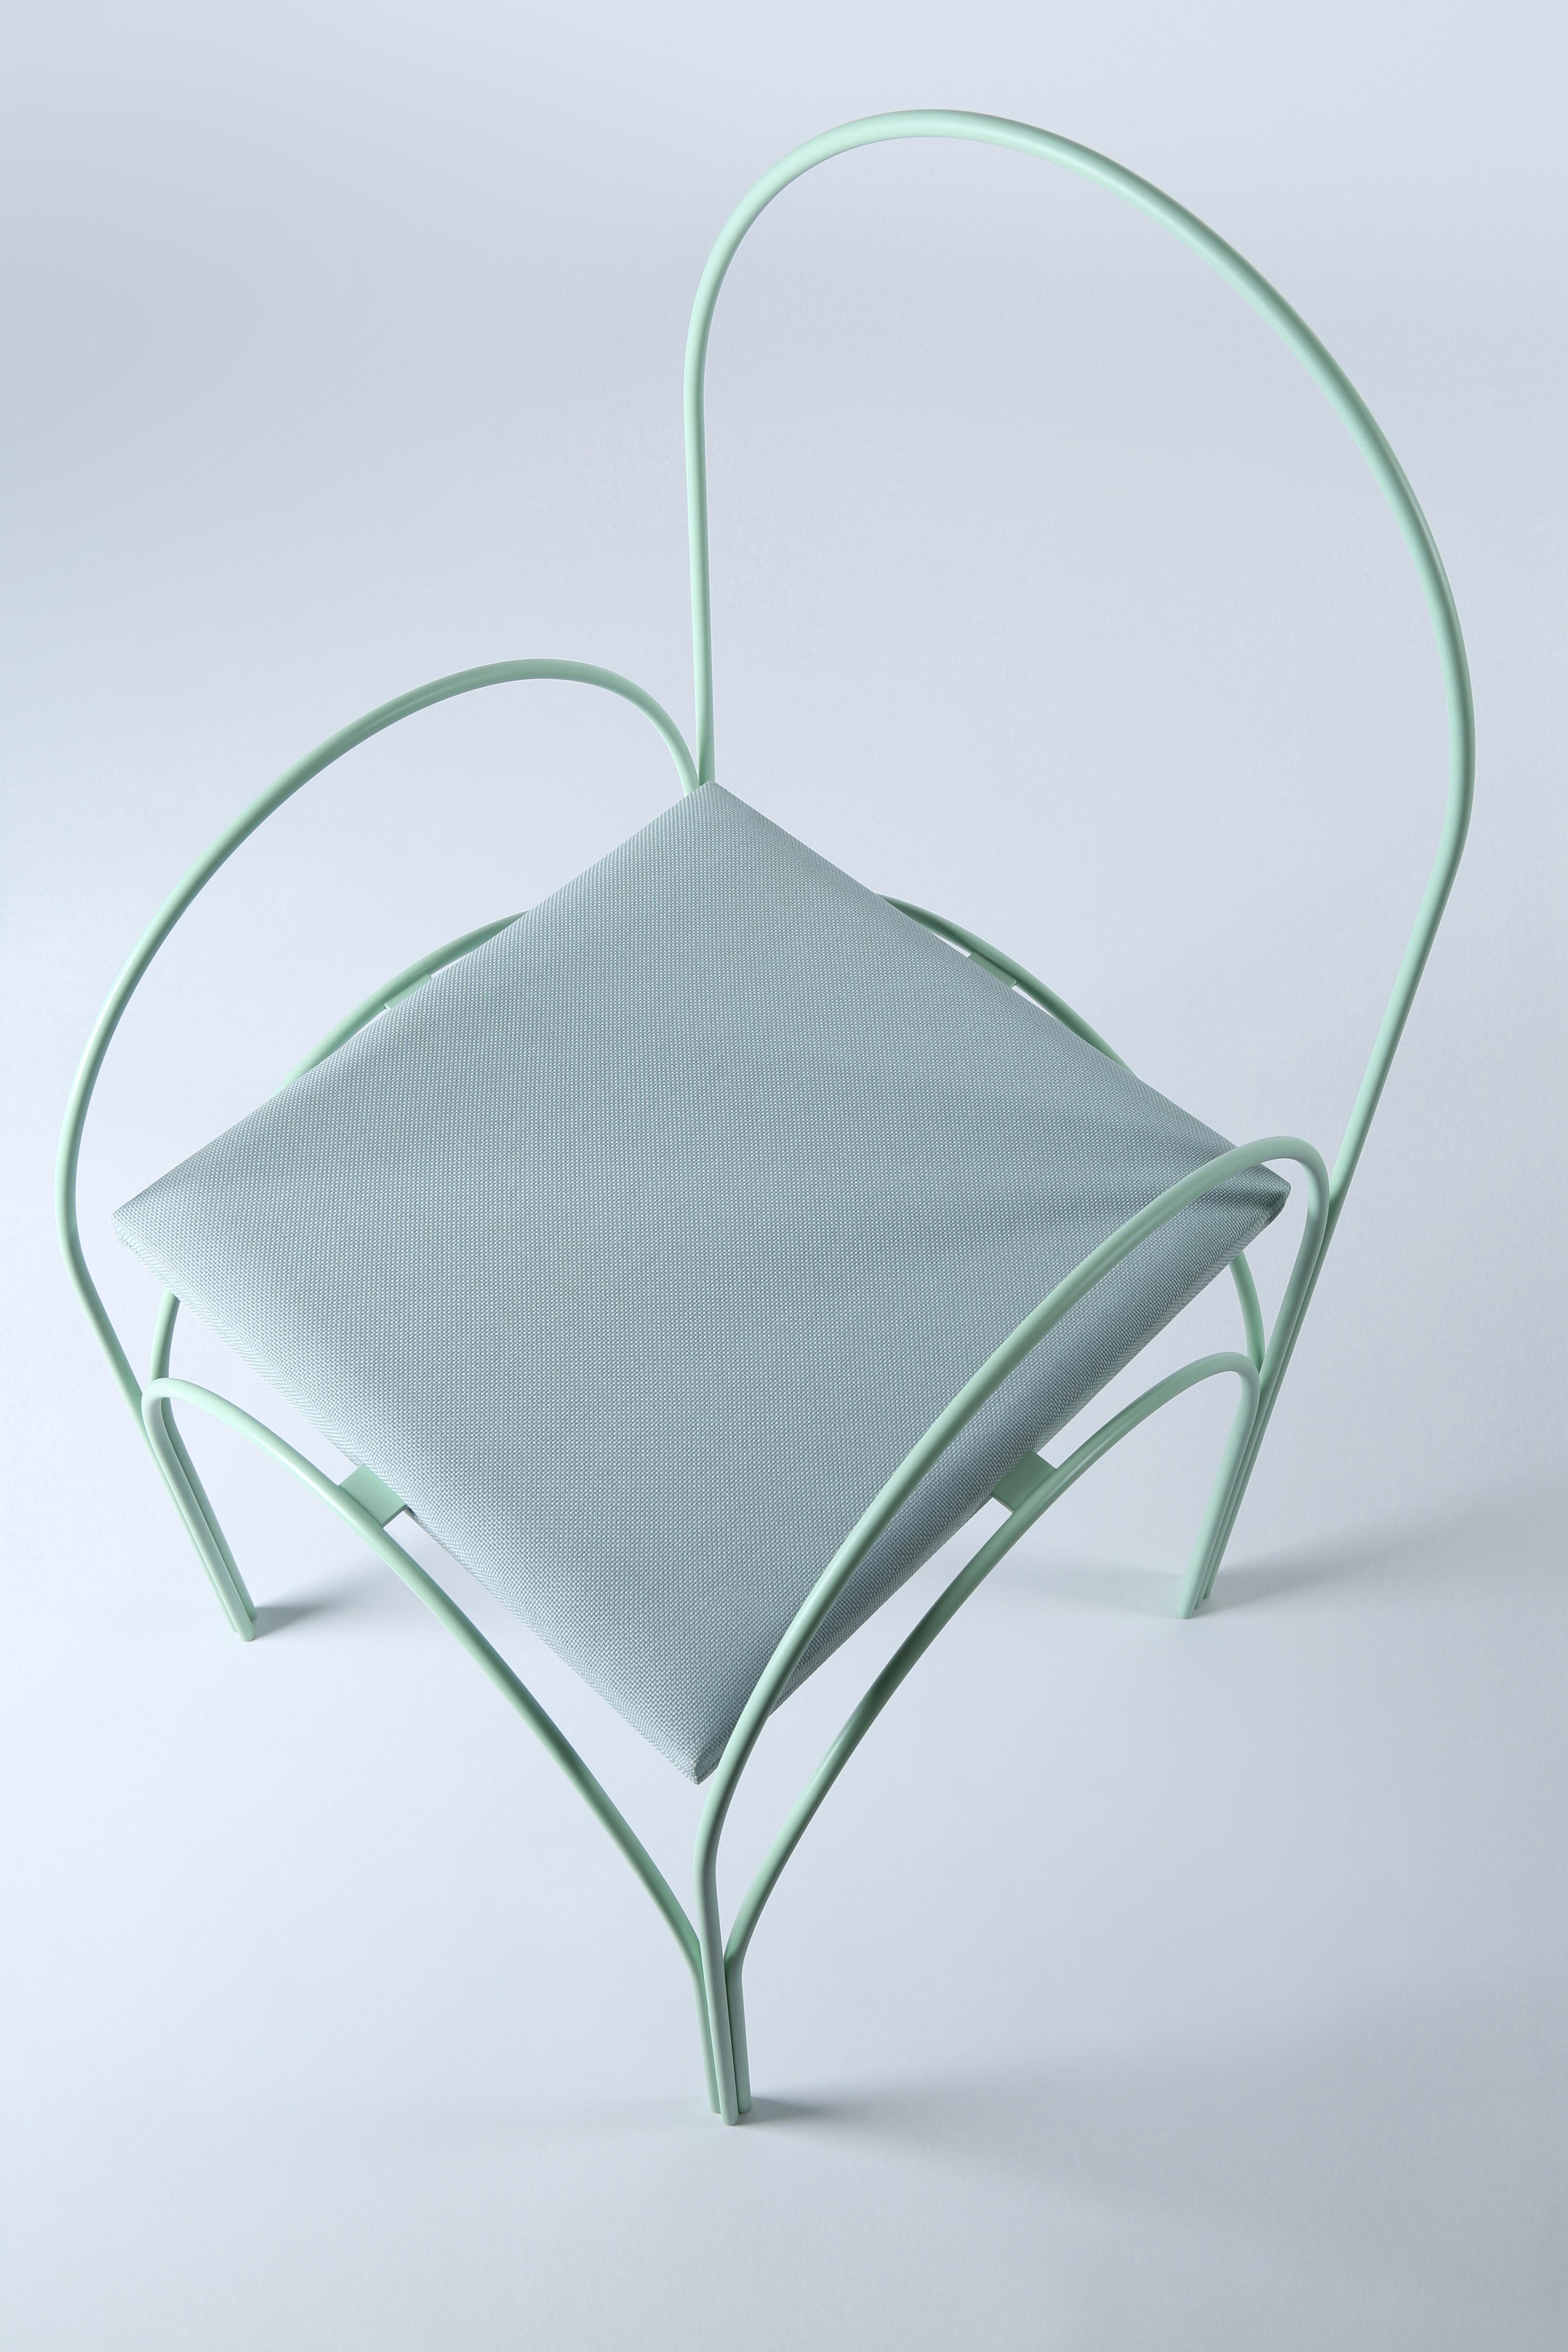 Hawa Beirut naked chair by Richard Yasmine
Materials: Structure in powder coated metal, fabric upholstery 
Dimensions: H 92 cm x W 46cm x D 47cm.

HAWA Beirut, a collection of very light or airy furniture inspired from the Lebanese architecture